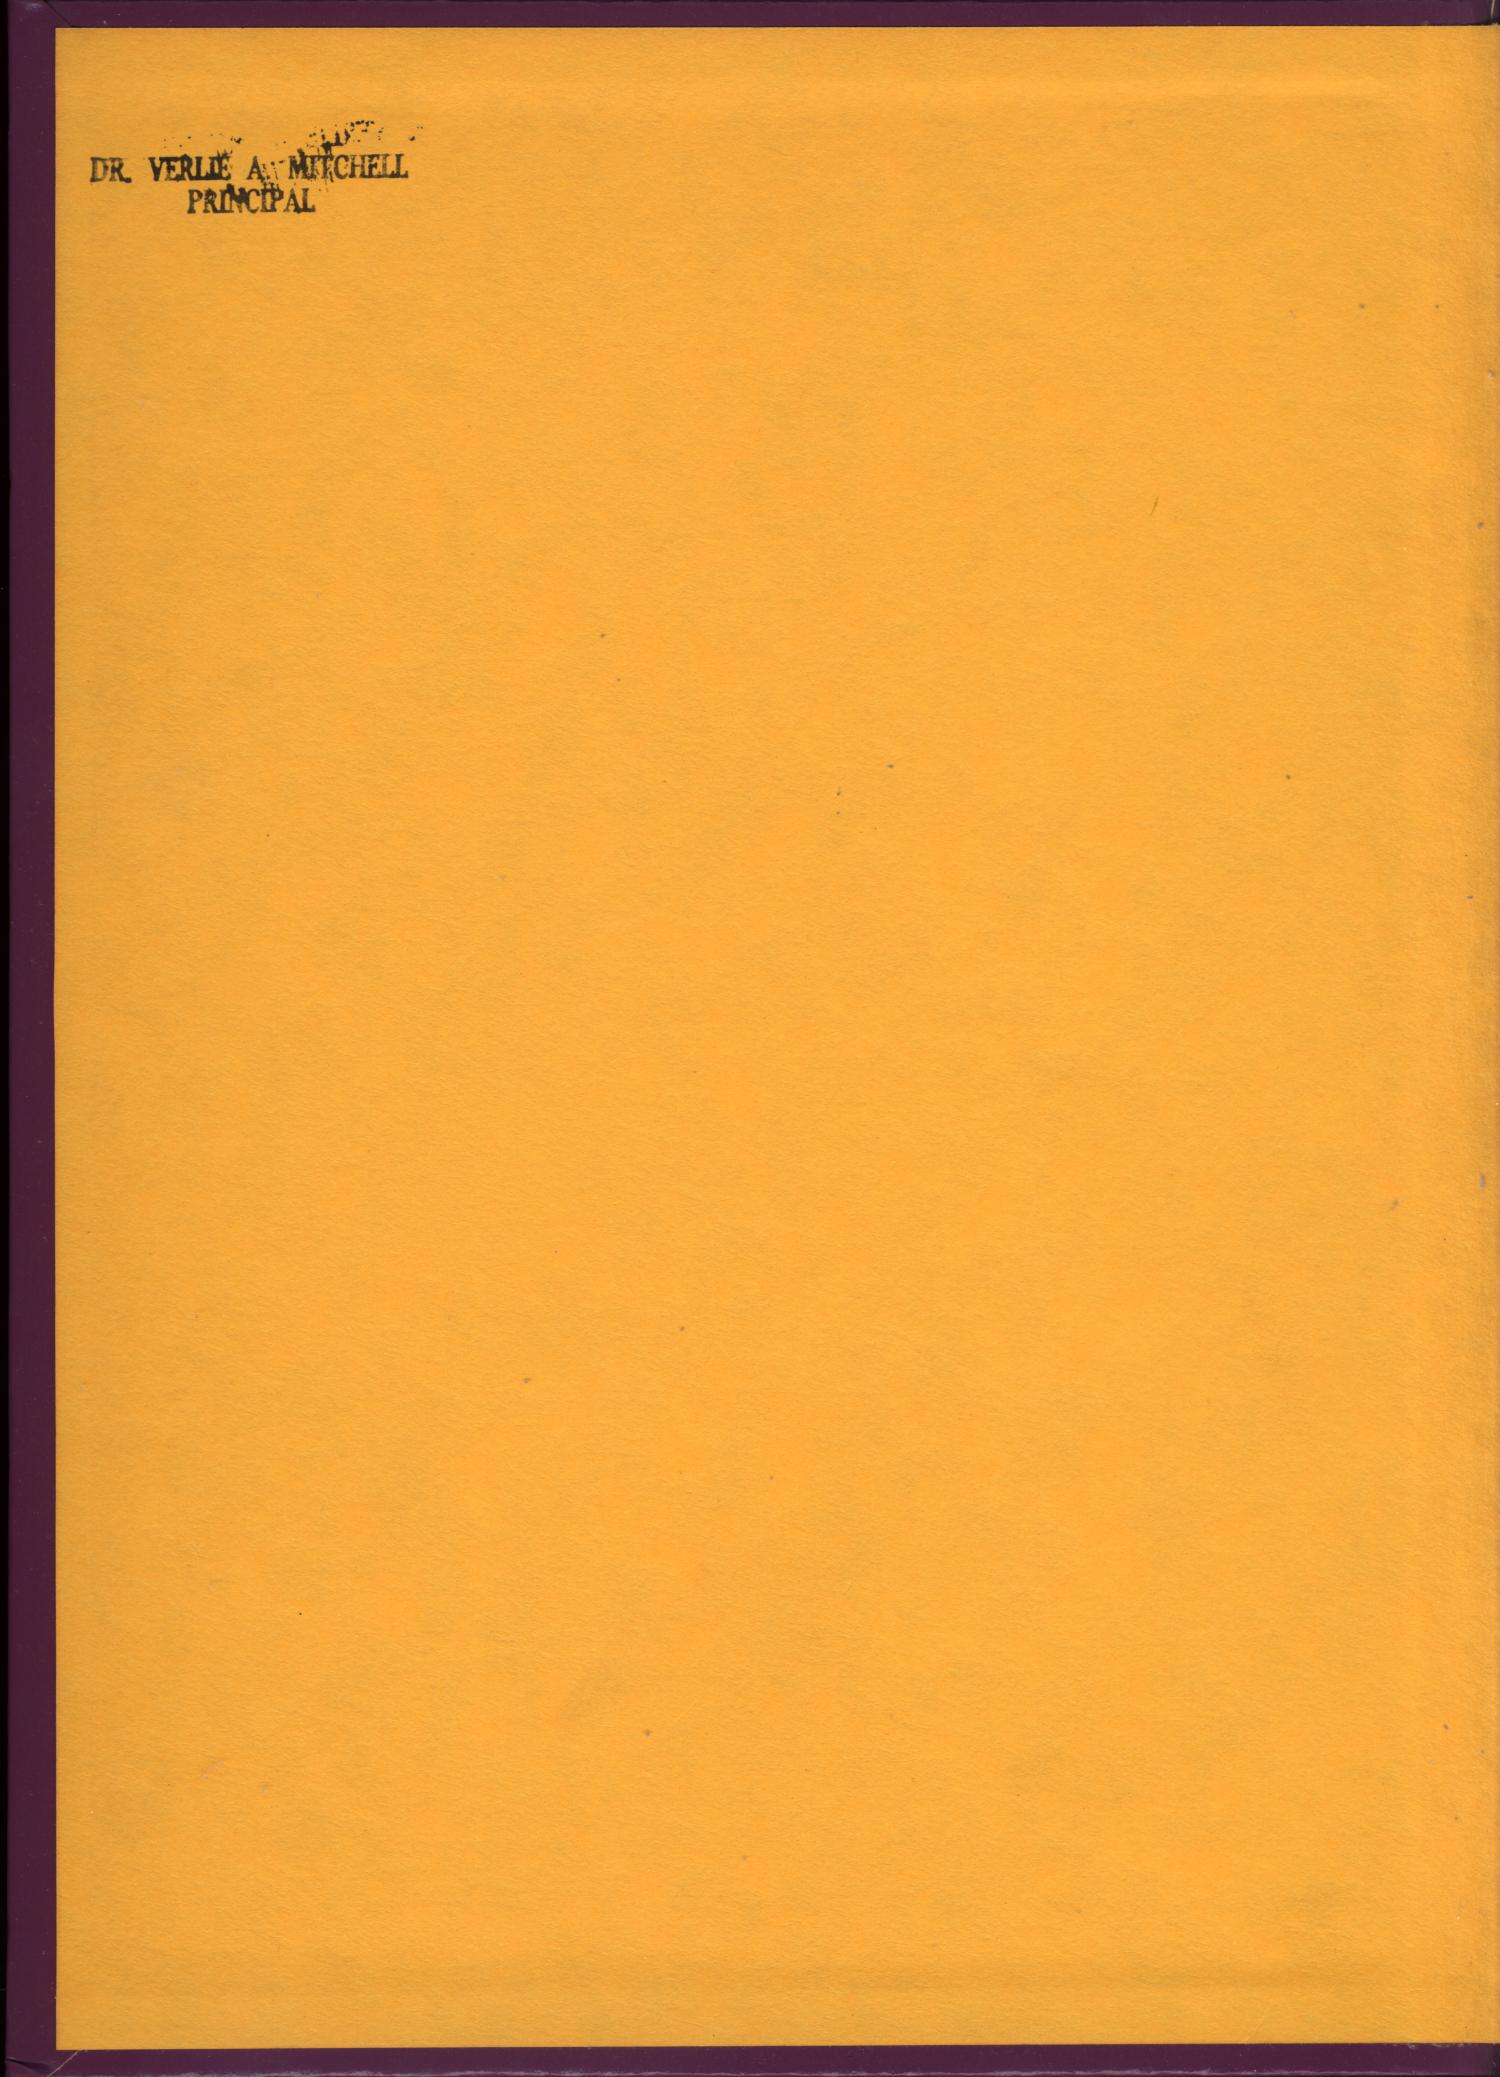 The Bumblebee, Yearbook of Lincoln High School, 1983
                                                
                                                    Front Inside
                                                